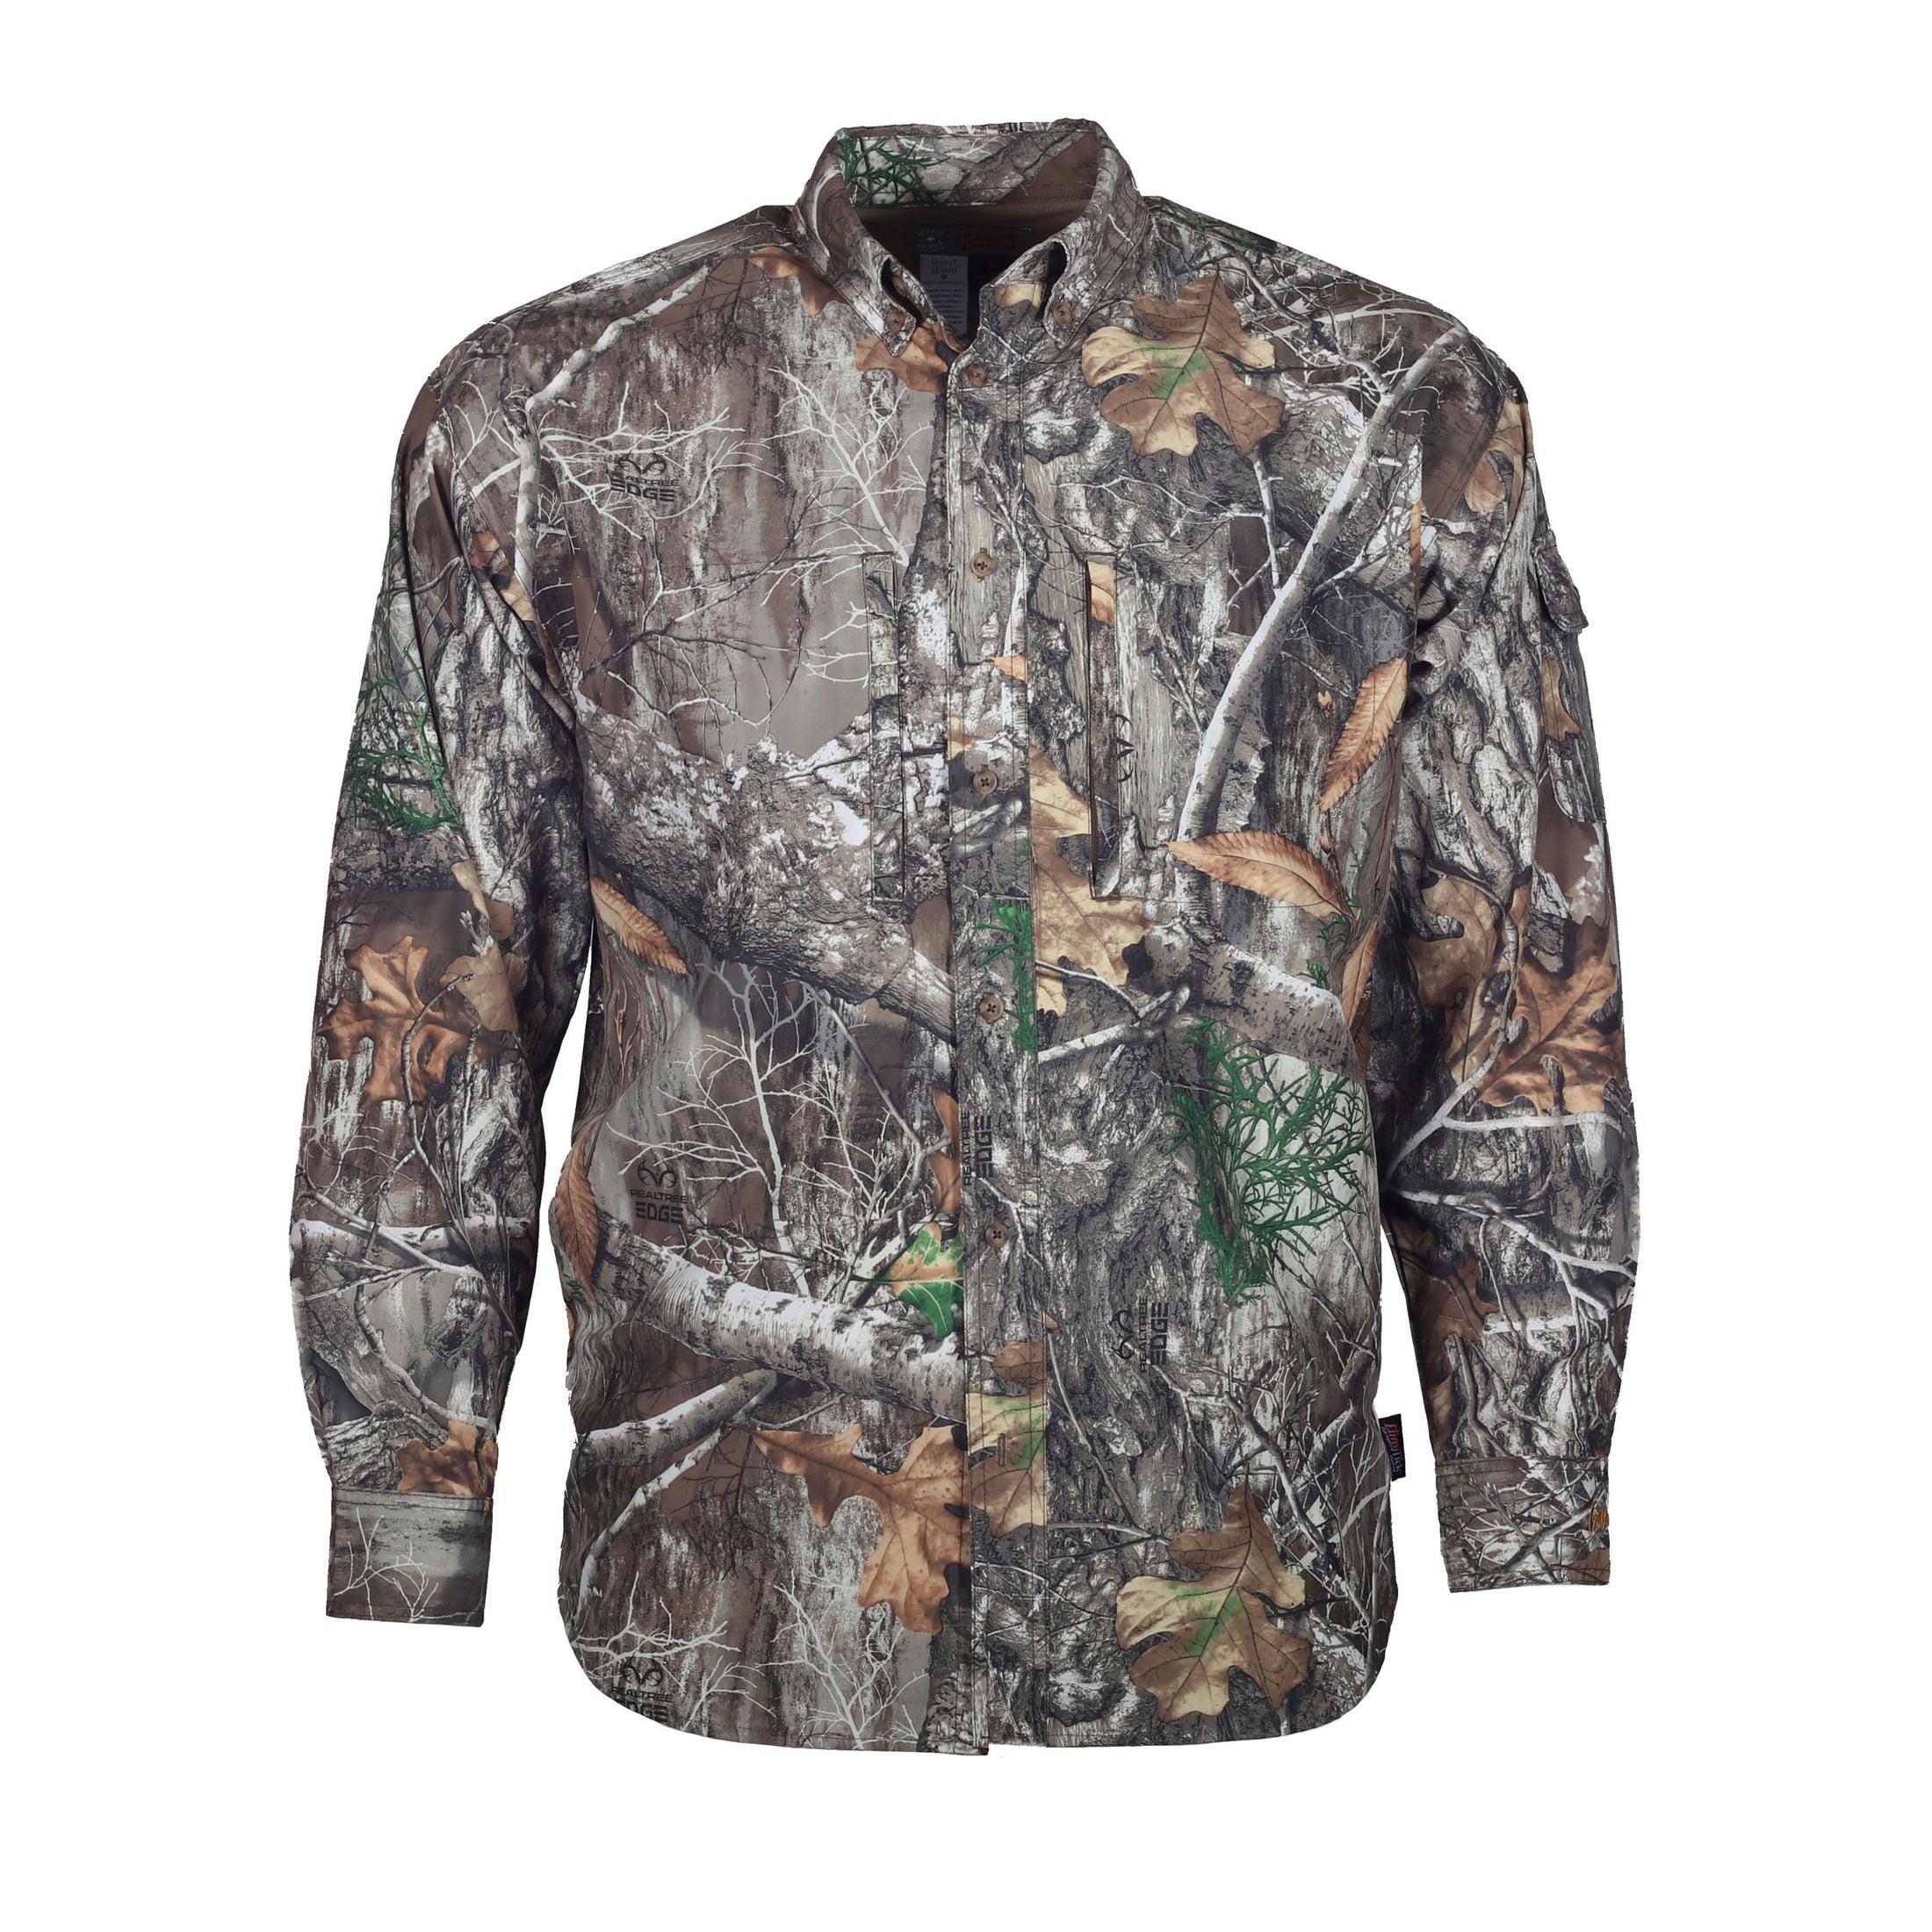 gamehide Elimitick Insect Repellent Ultra Lite Shirt front (realtree edge)